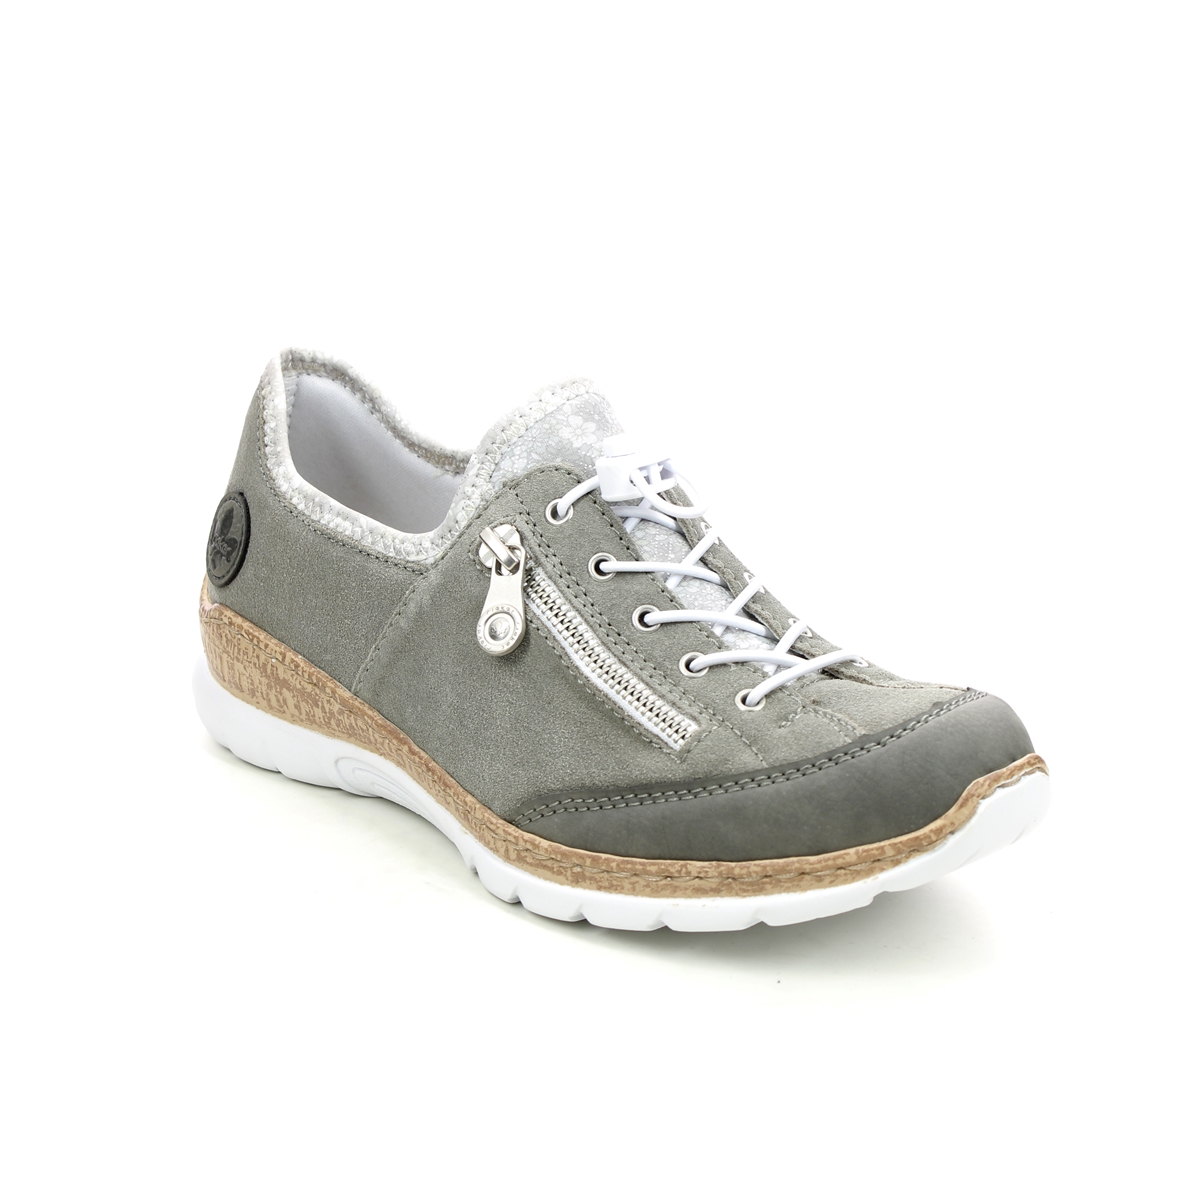 Rieker Empire 11 Taupe Leather Womens Lacing Shoes N42F1-40 In Size 37 In Plain Taupe Leather